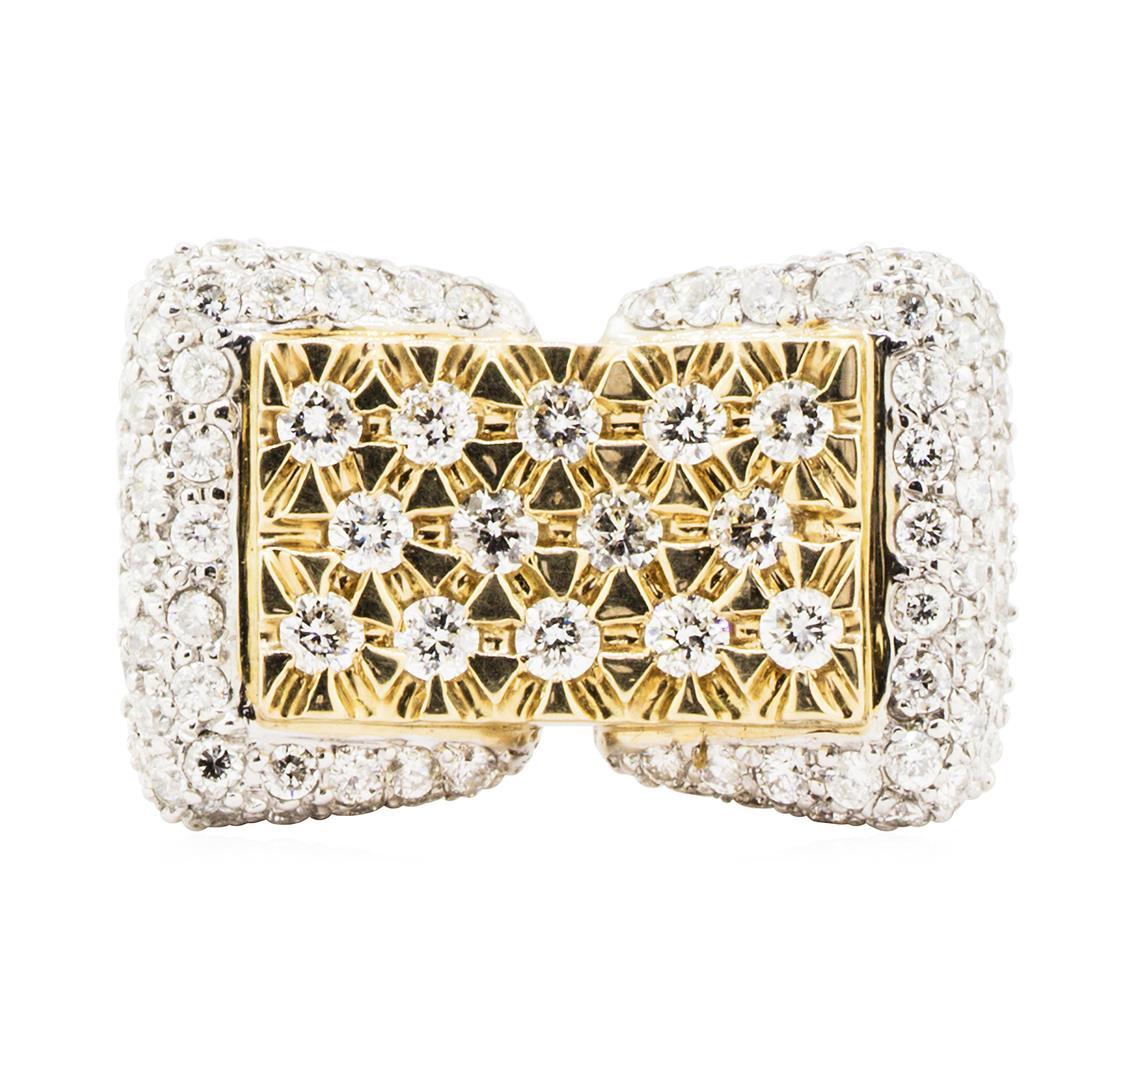 1.75 ctw Diamond Ring - 14KT White and Yellow Gold